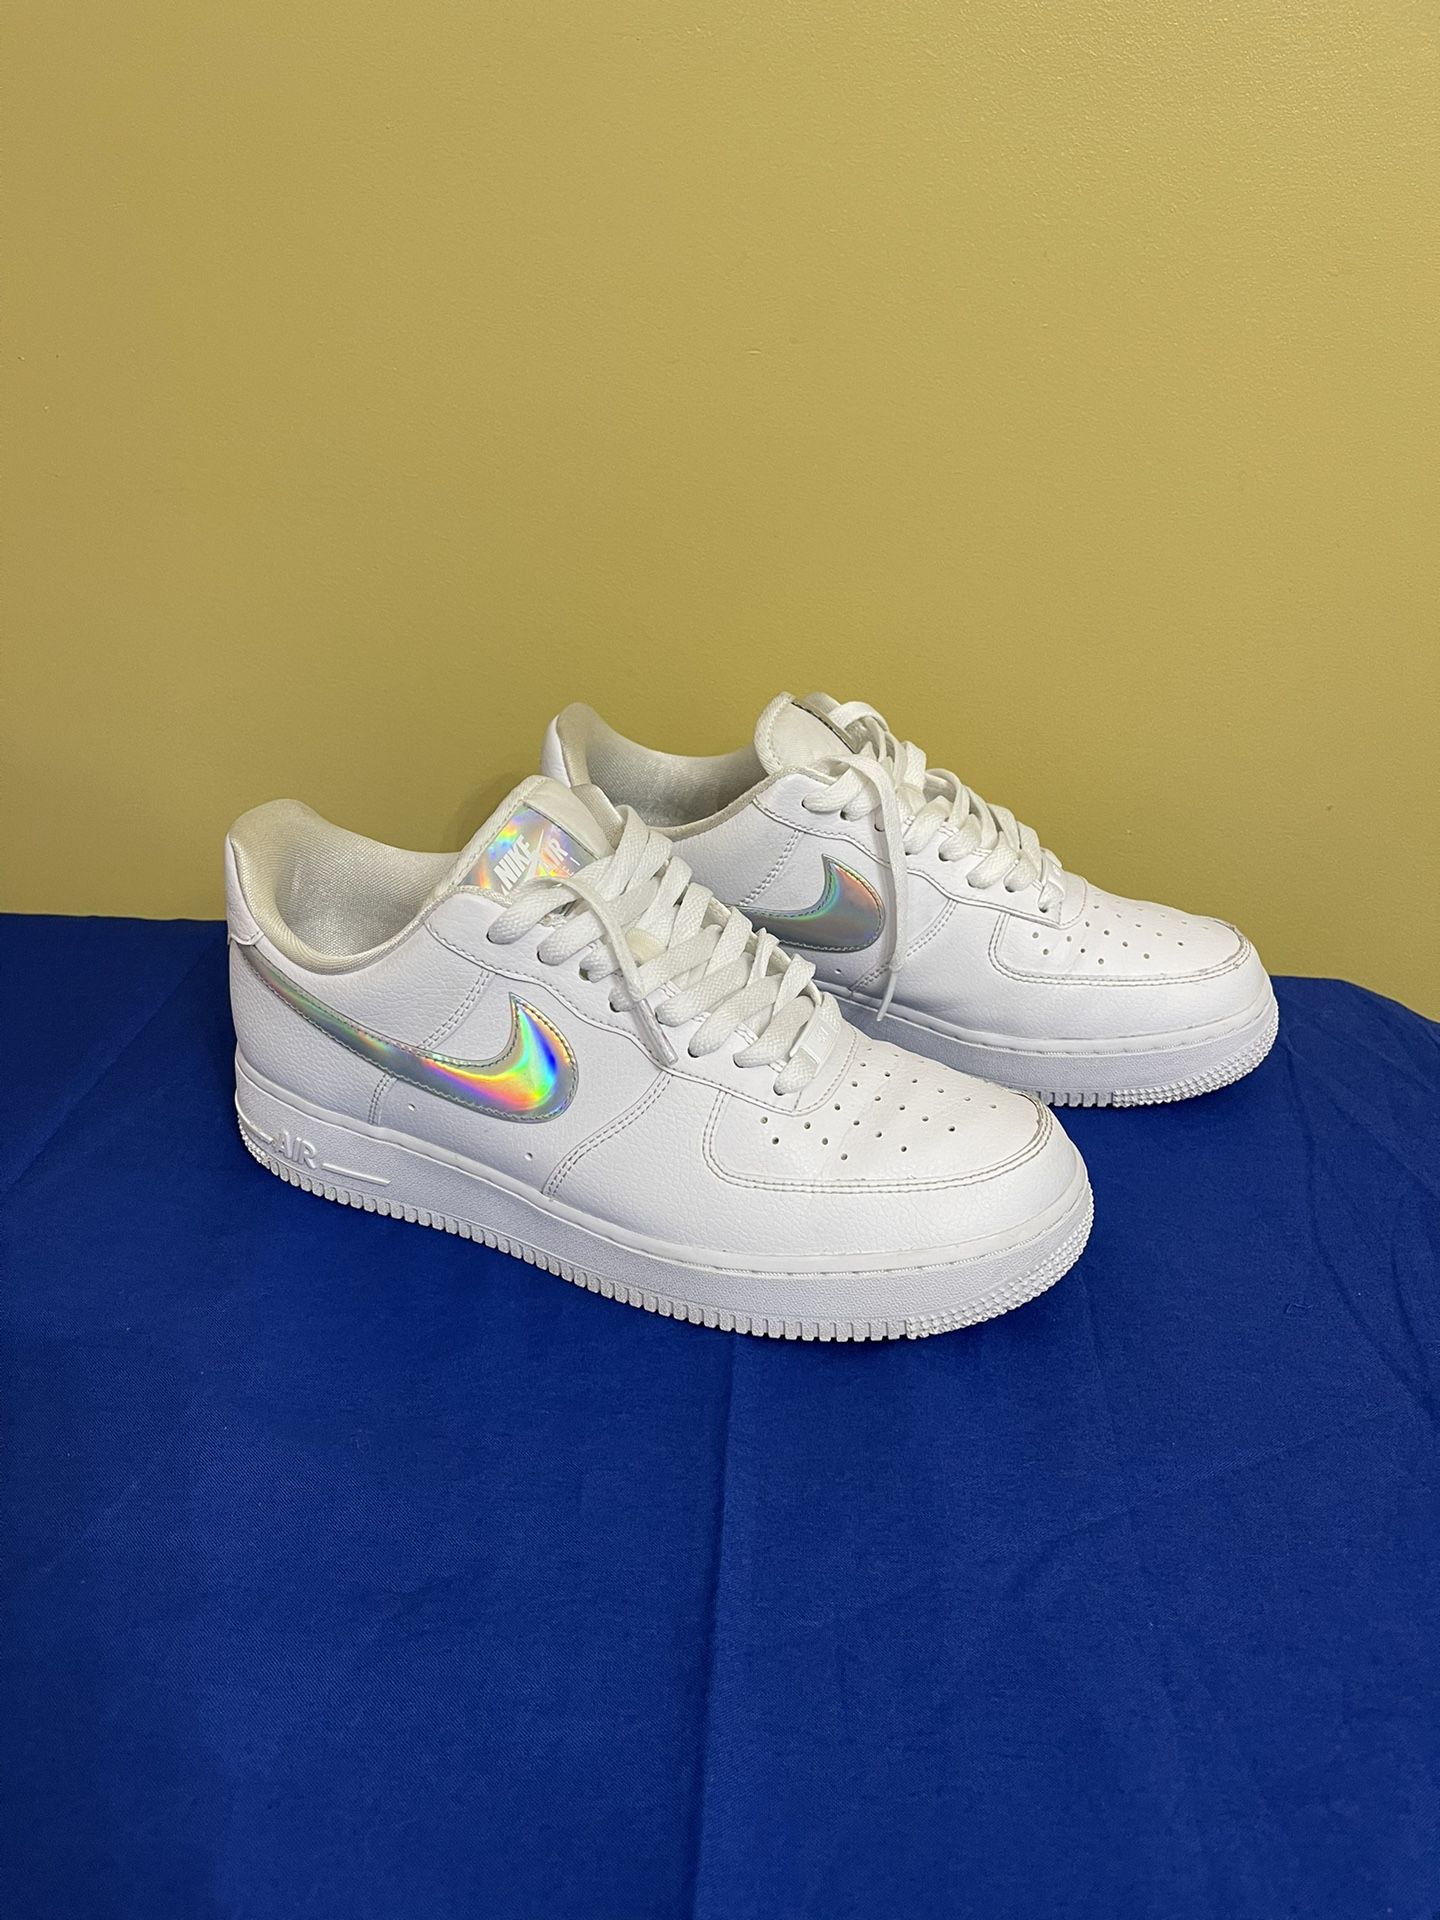 documental Magistrado Buzo Nike Air Force 1 Low White for Sale in Reston, VA - OfferUp